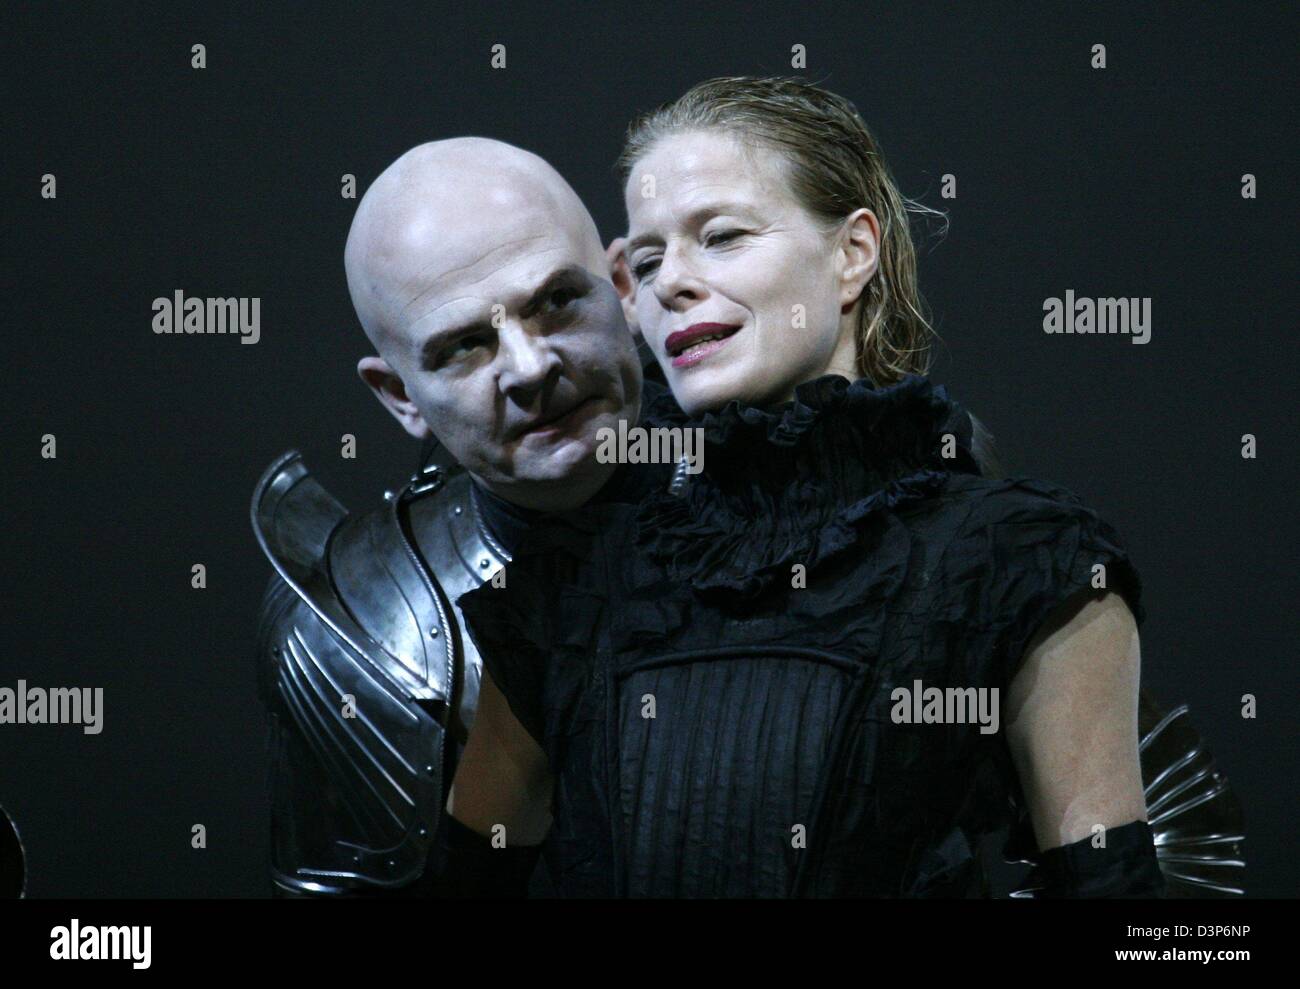 Corinna Kirchhoff as Queen Isabeau (R) and Veit Schubert (L) as Count Philip pictured during the dress rehearsal of 'The Maid of Orelans' by Friedrich Schiller in Berlin, Germany, 13 September 2006. The staging of Claus Peymann premieres on 15 September 2006. Photo: Claudia Esch-Kenkel Stock Photo